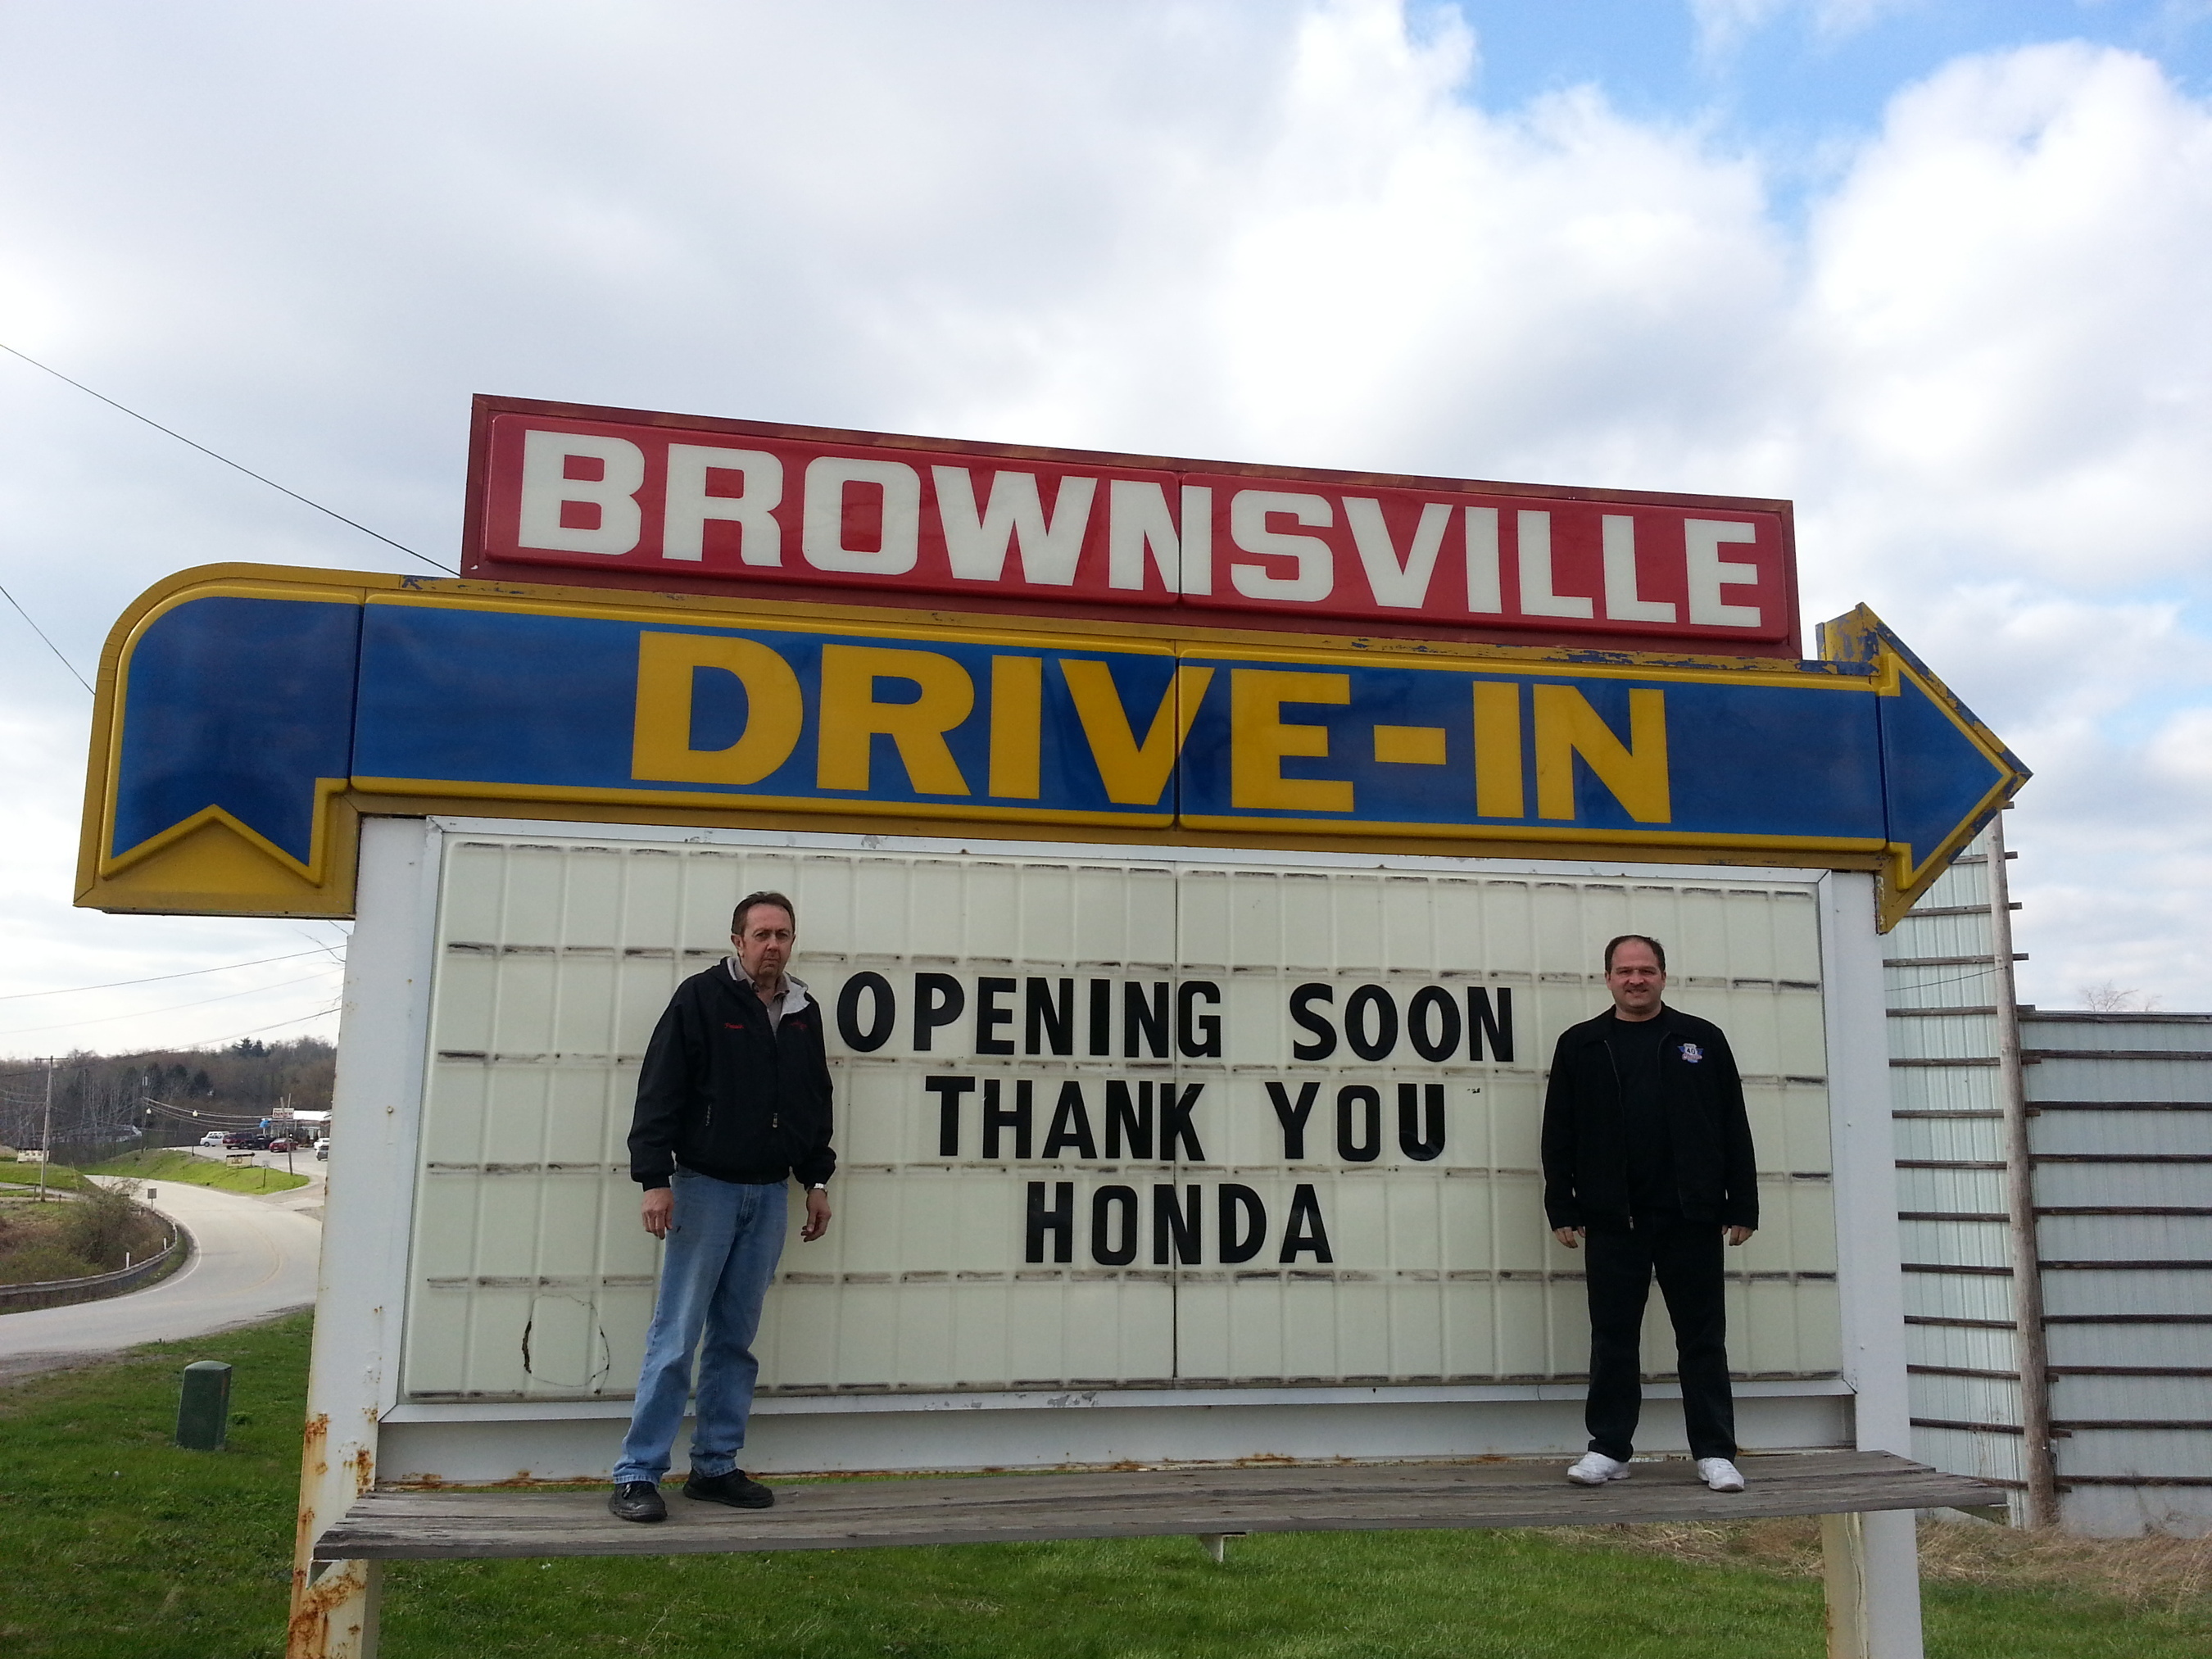 Brownsville Drive-In owner, John Sebeck and theater manager, Charlie Perkins thank Honda for the funds donated through Project Drive-In. (PRNewsFoto/American Honda Motor Co., Inc.)